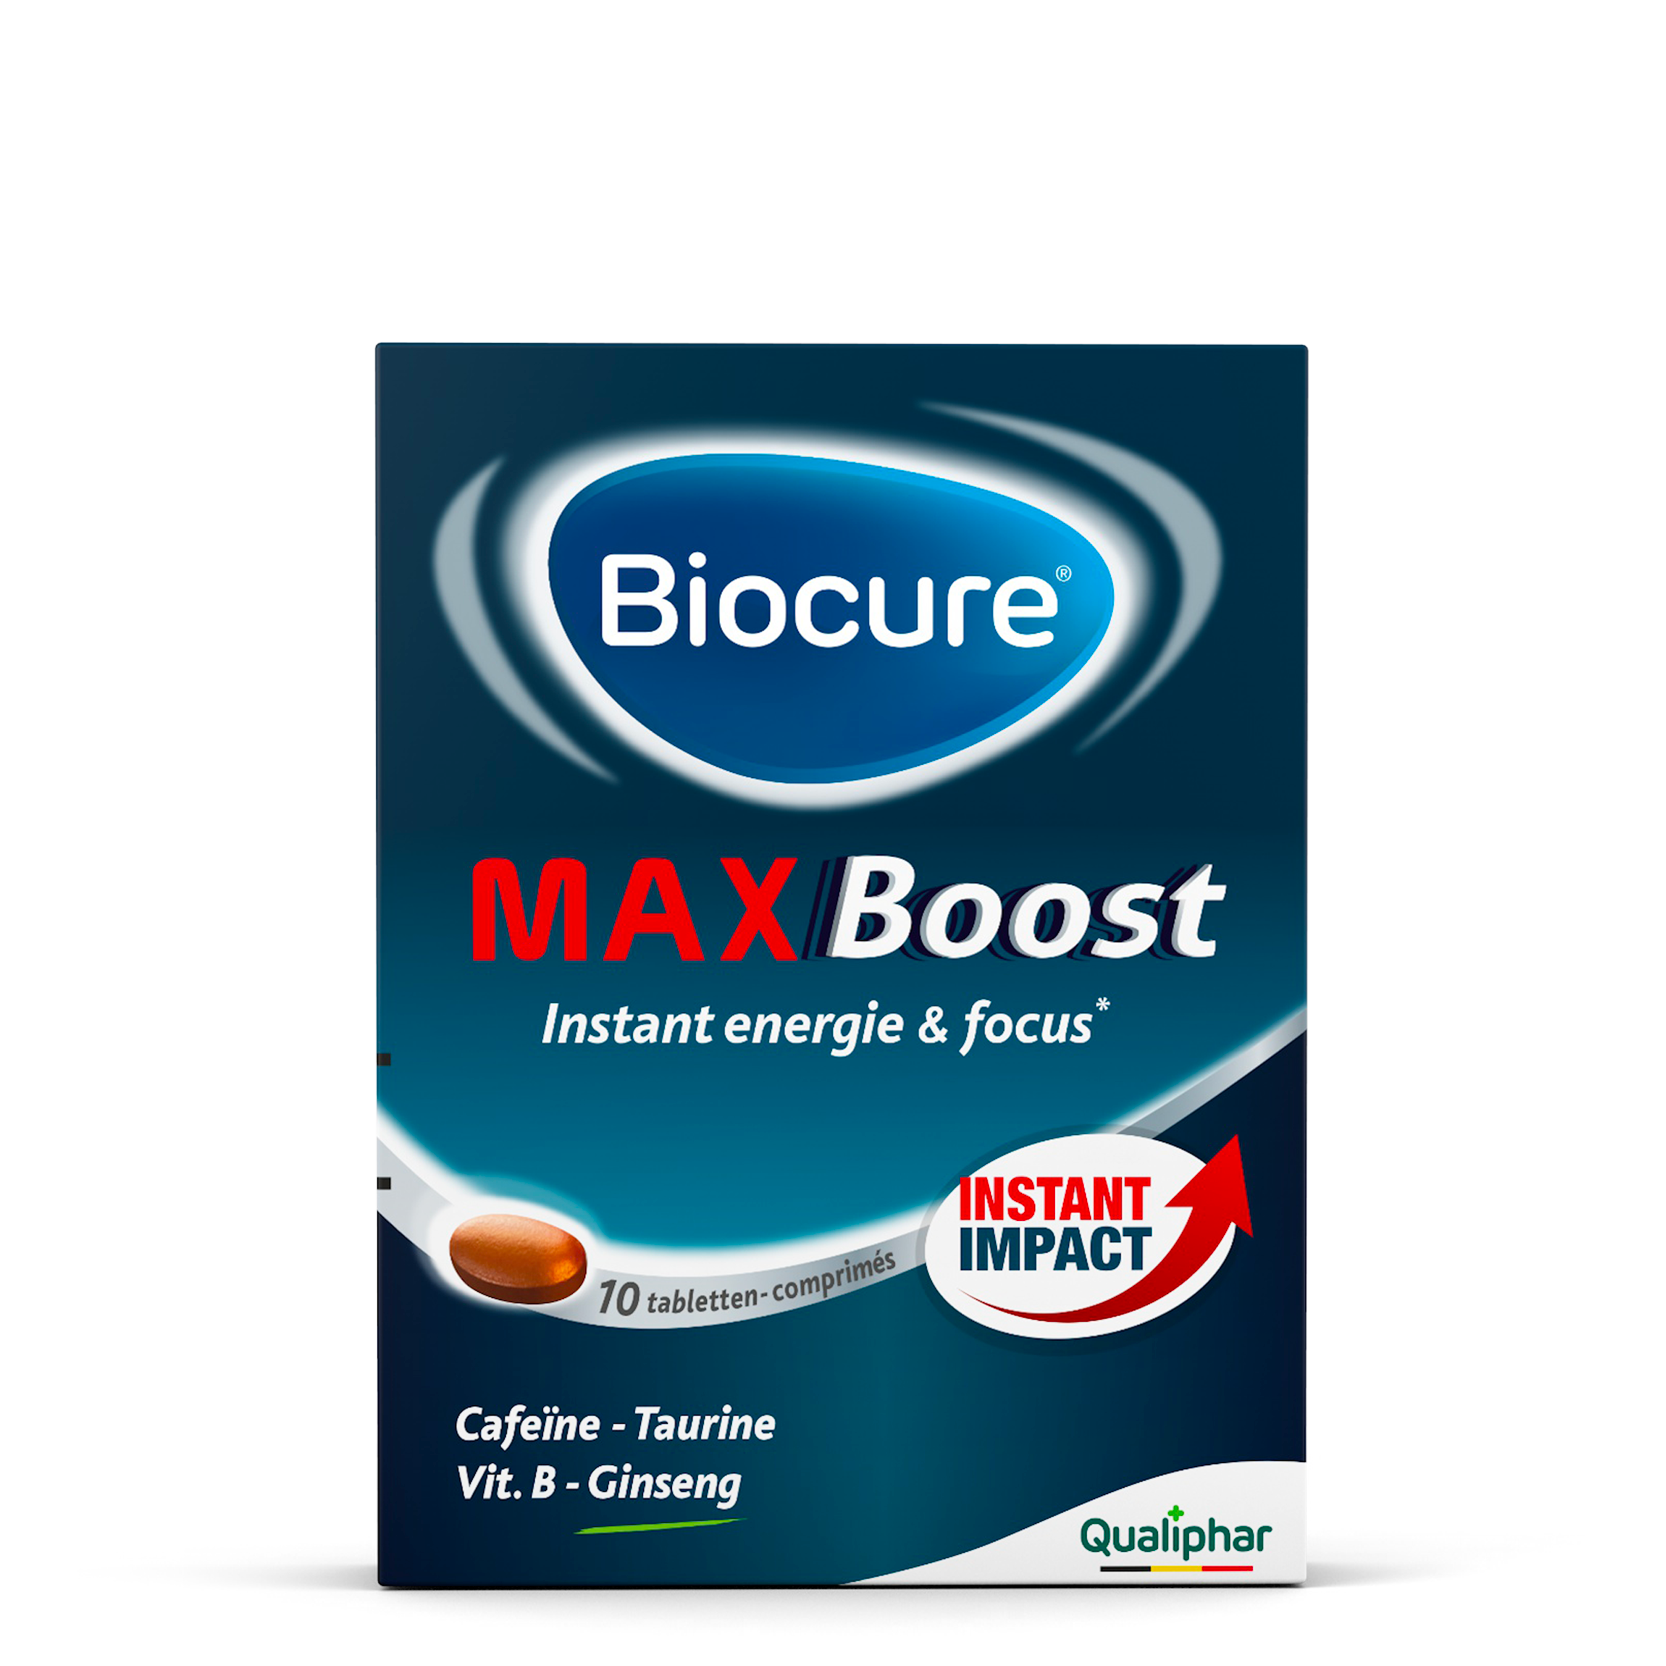 PACK-MAX-BOOST